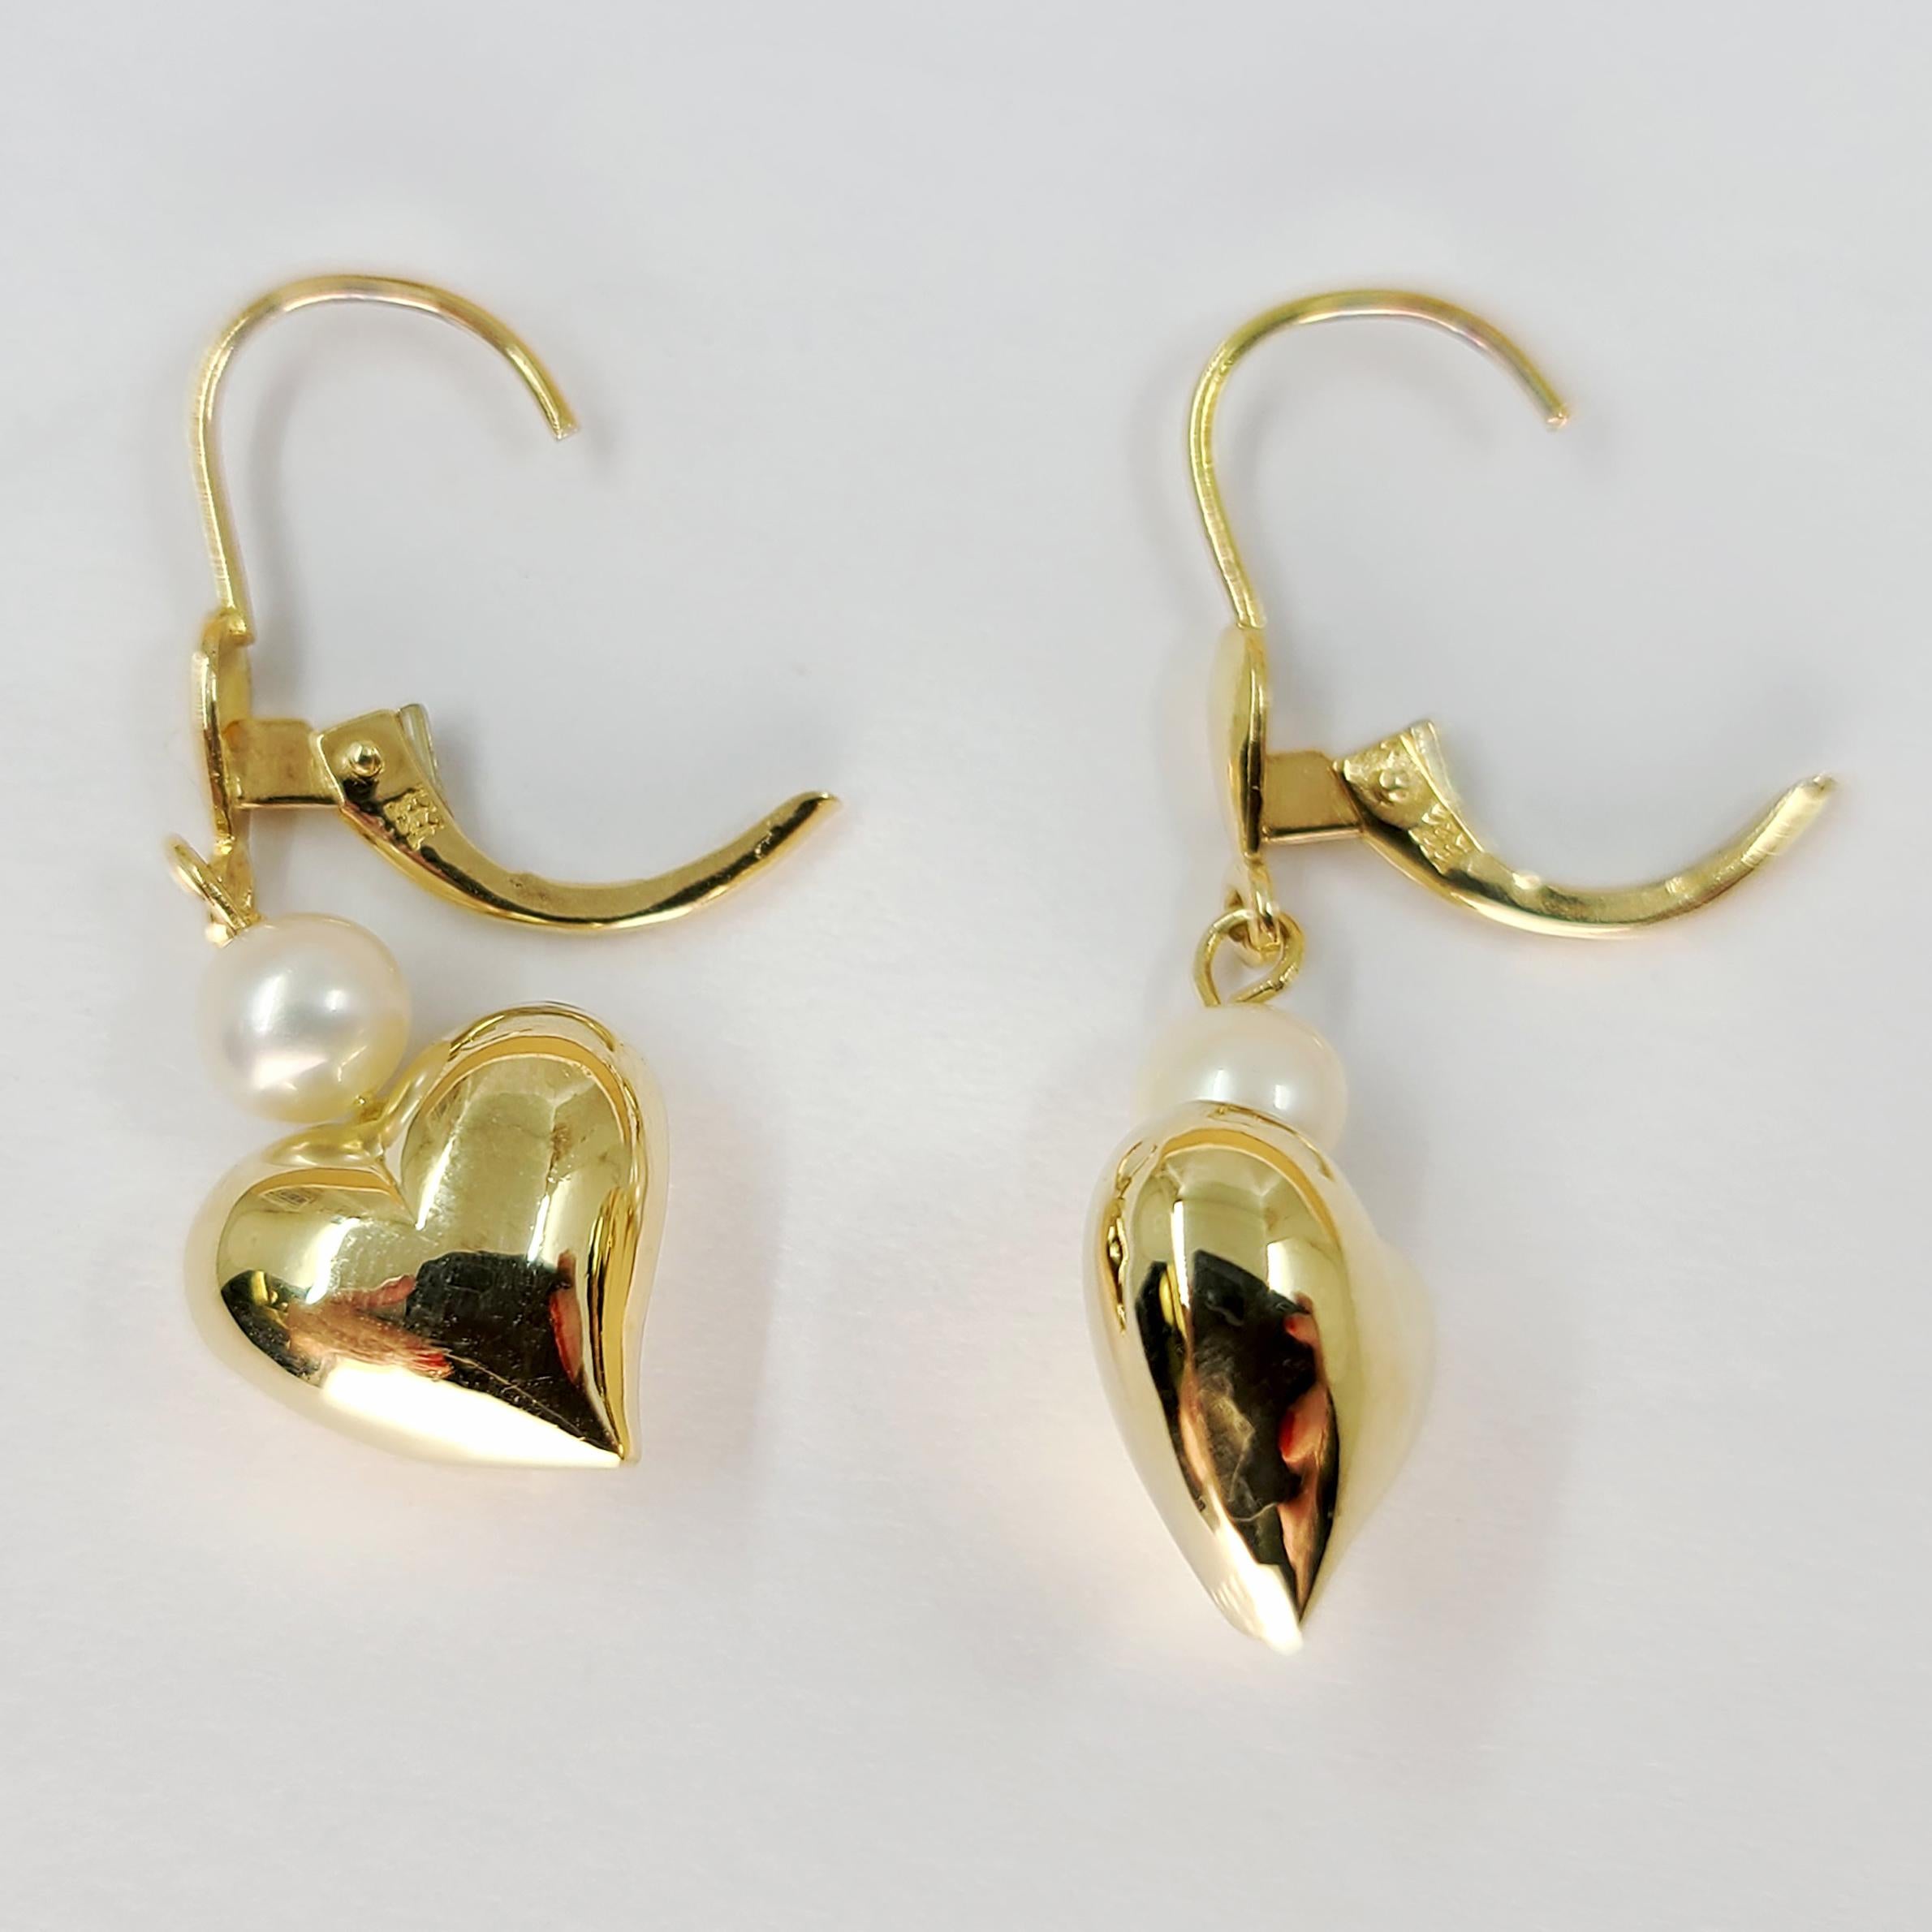 Round Cut 14 Karat Yellow Gold Heart and Pearl Drop Earrings